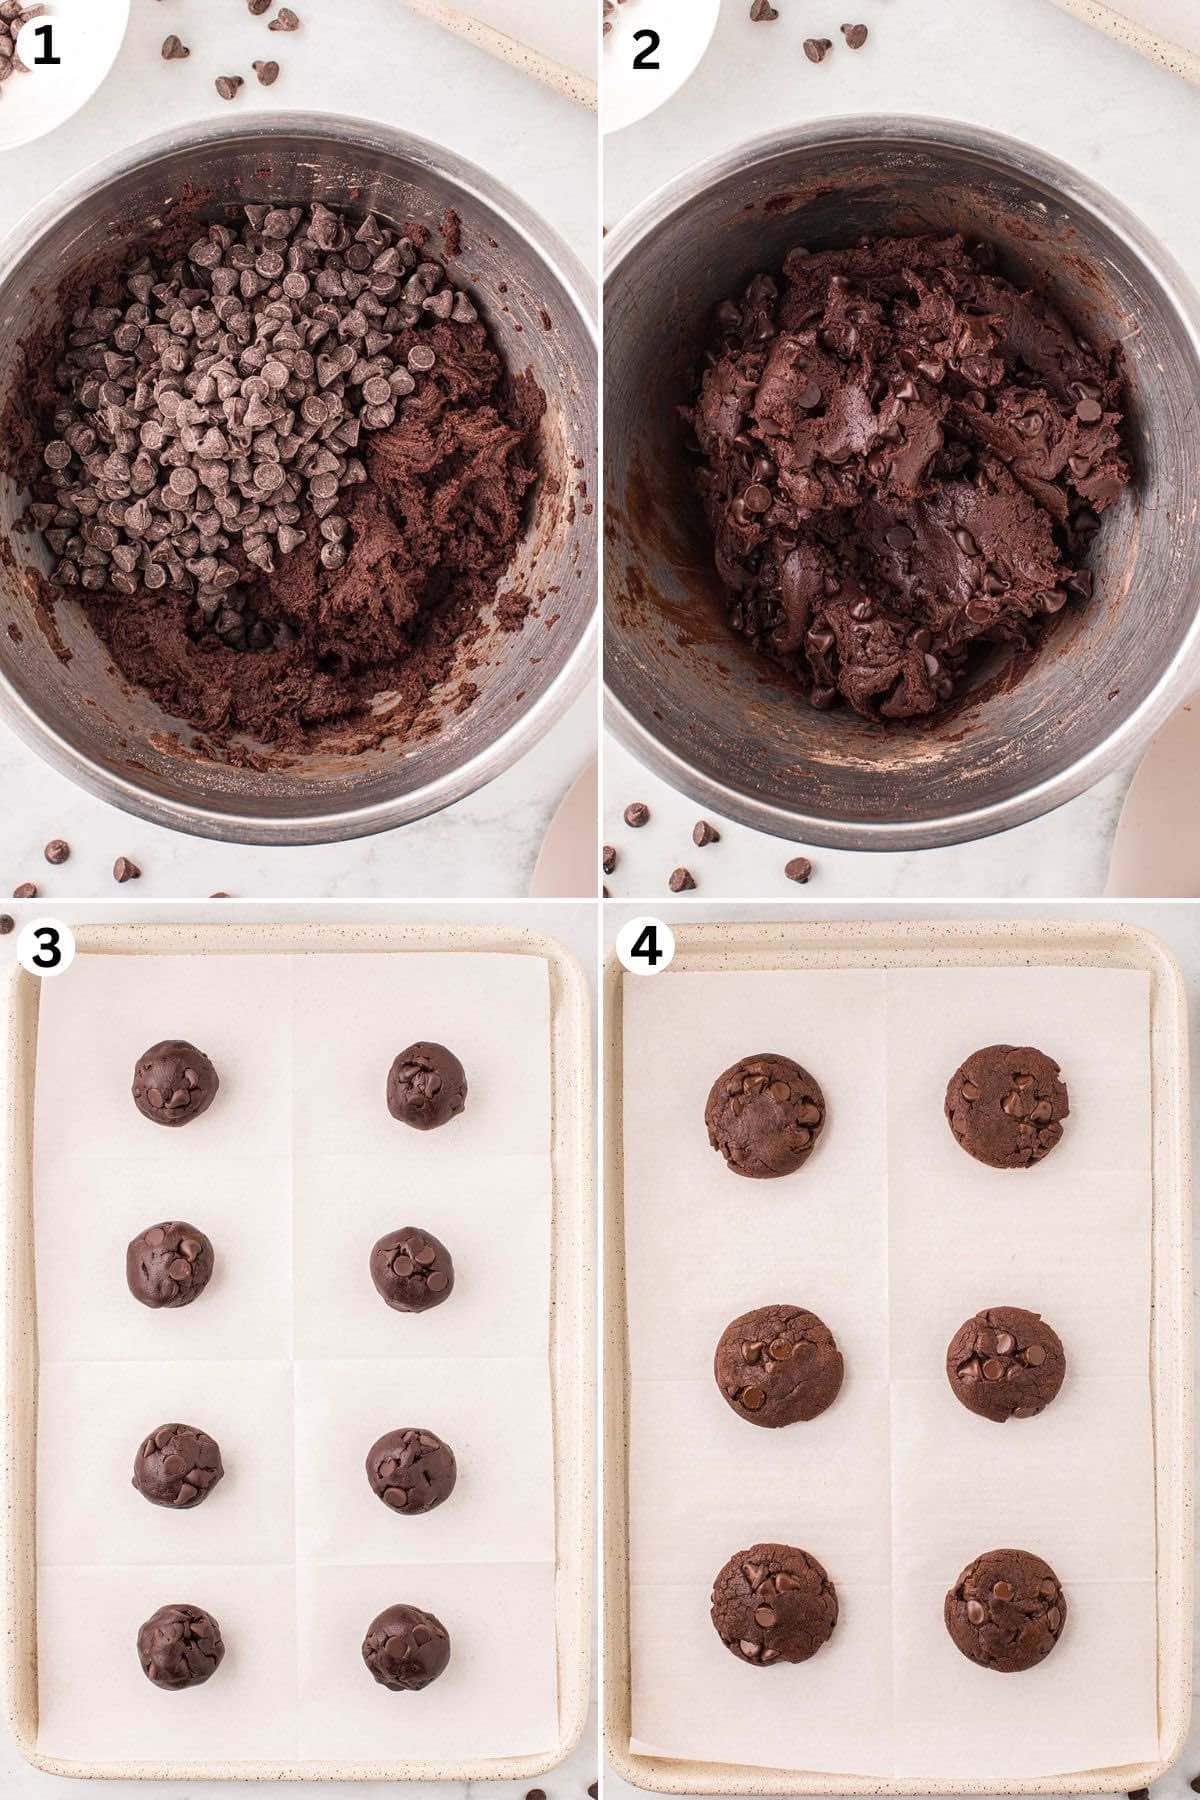 Mix all the ingredients in a bowl. Fold in the chocolate chips and stir. Scoop out cookies and place on the baking sheet. Flatten each cookie and bake.